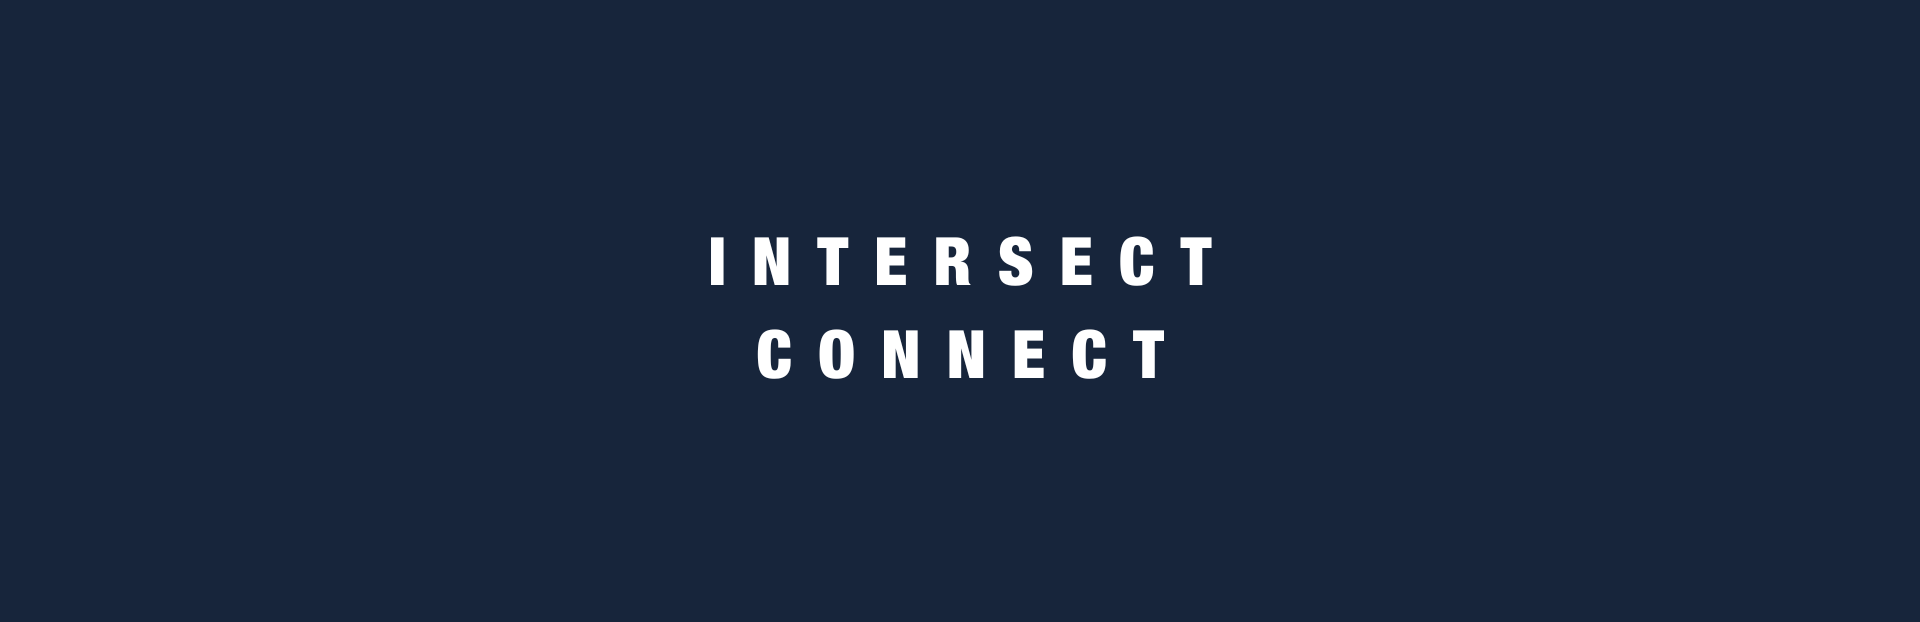 Intersect Connect